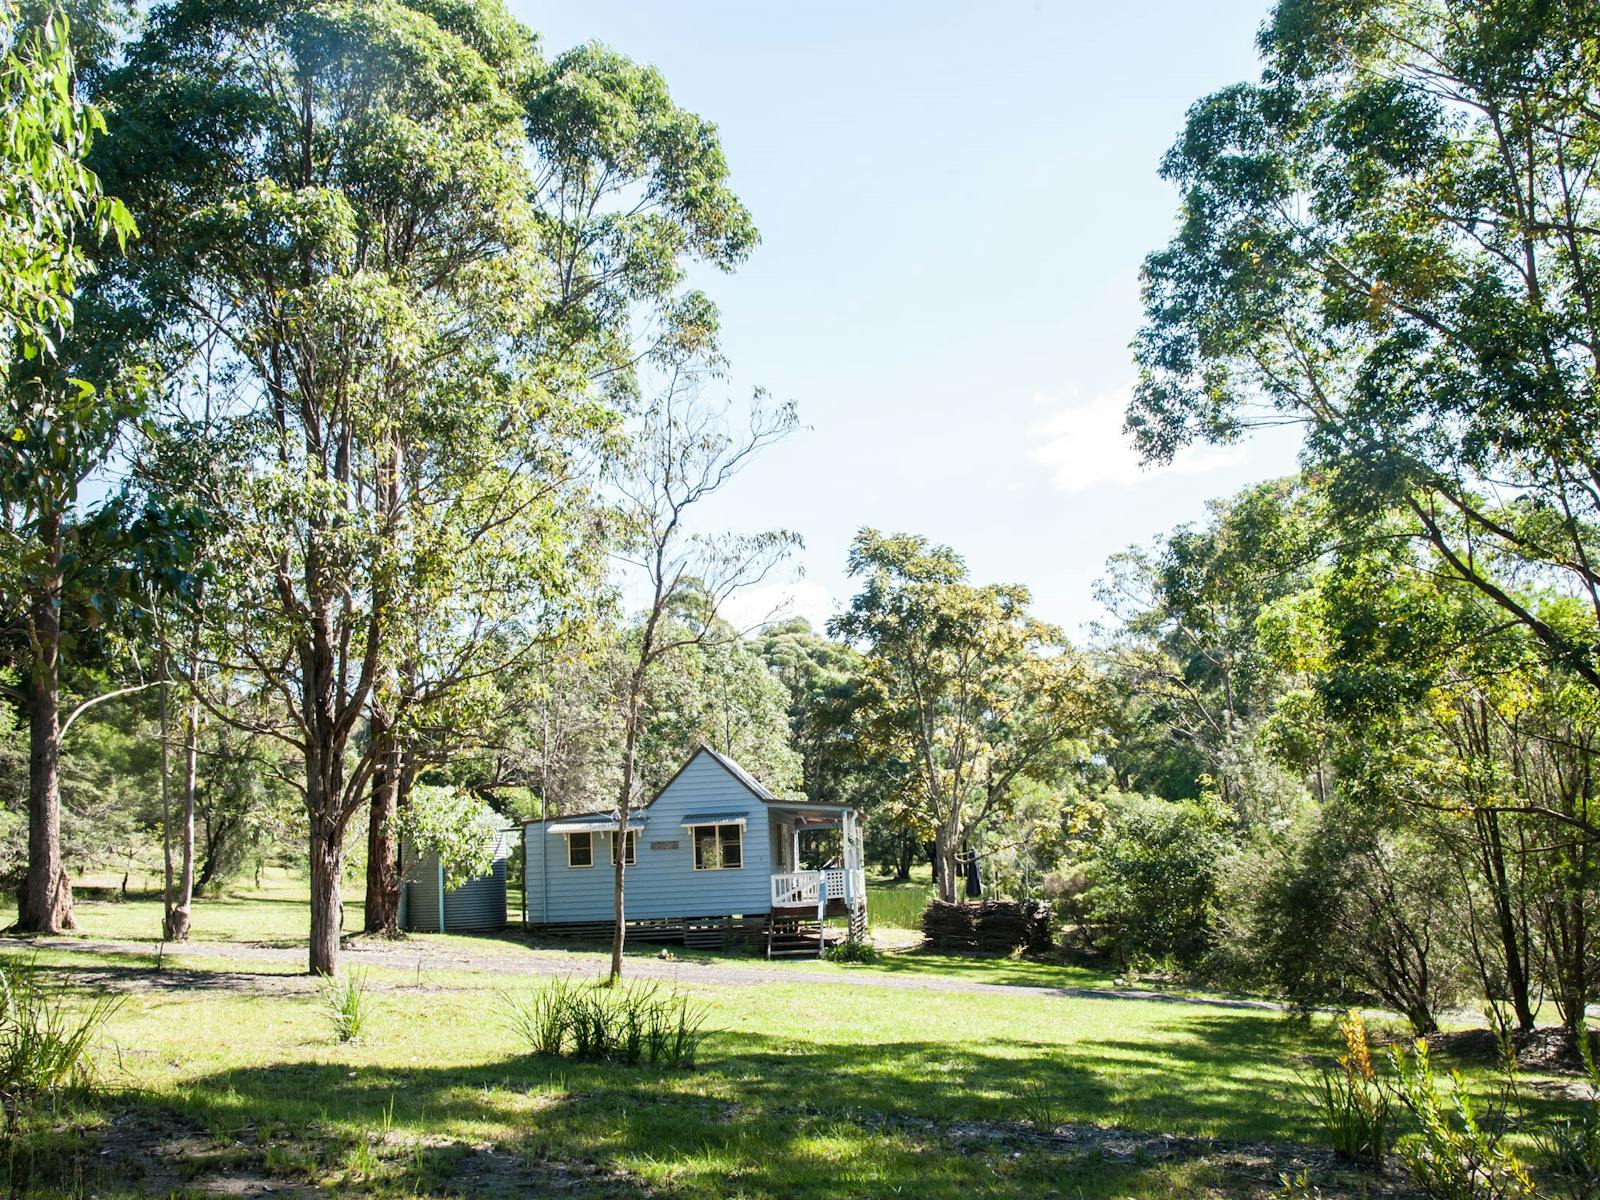 Cooee Cottage - our romantic little two bedroom cottage overlooking its own billabong with fire pit.